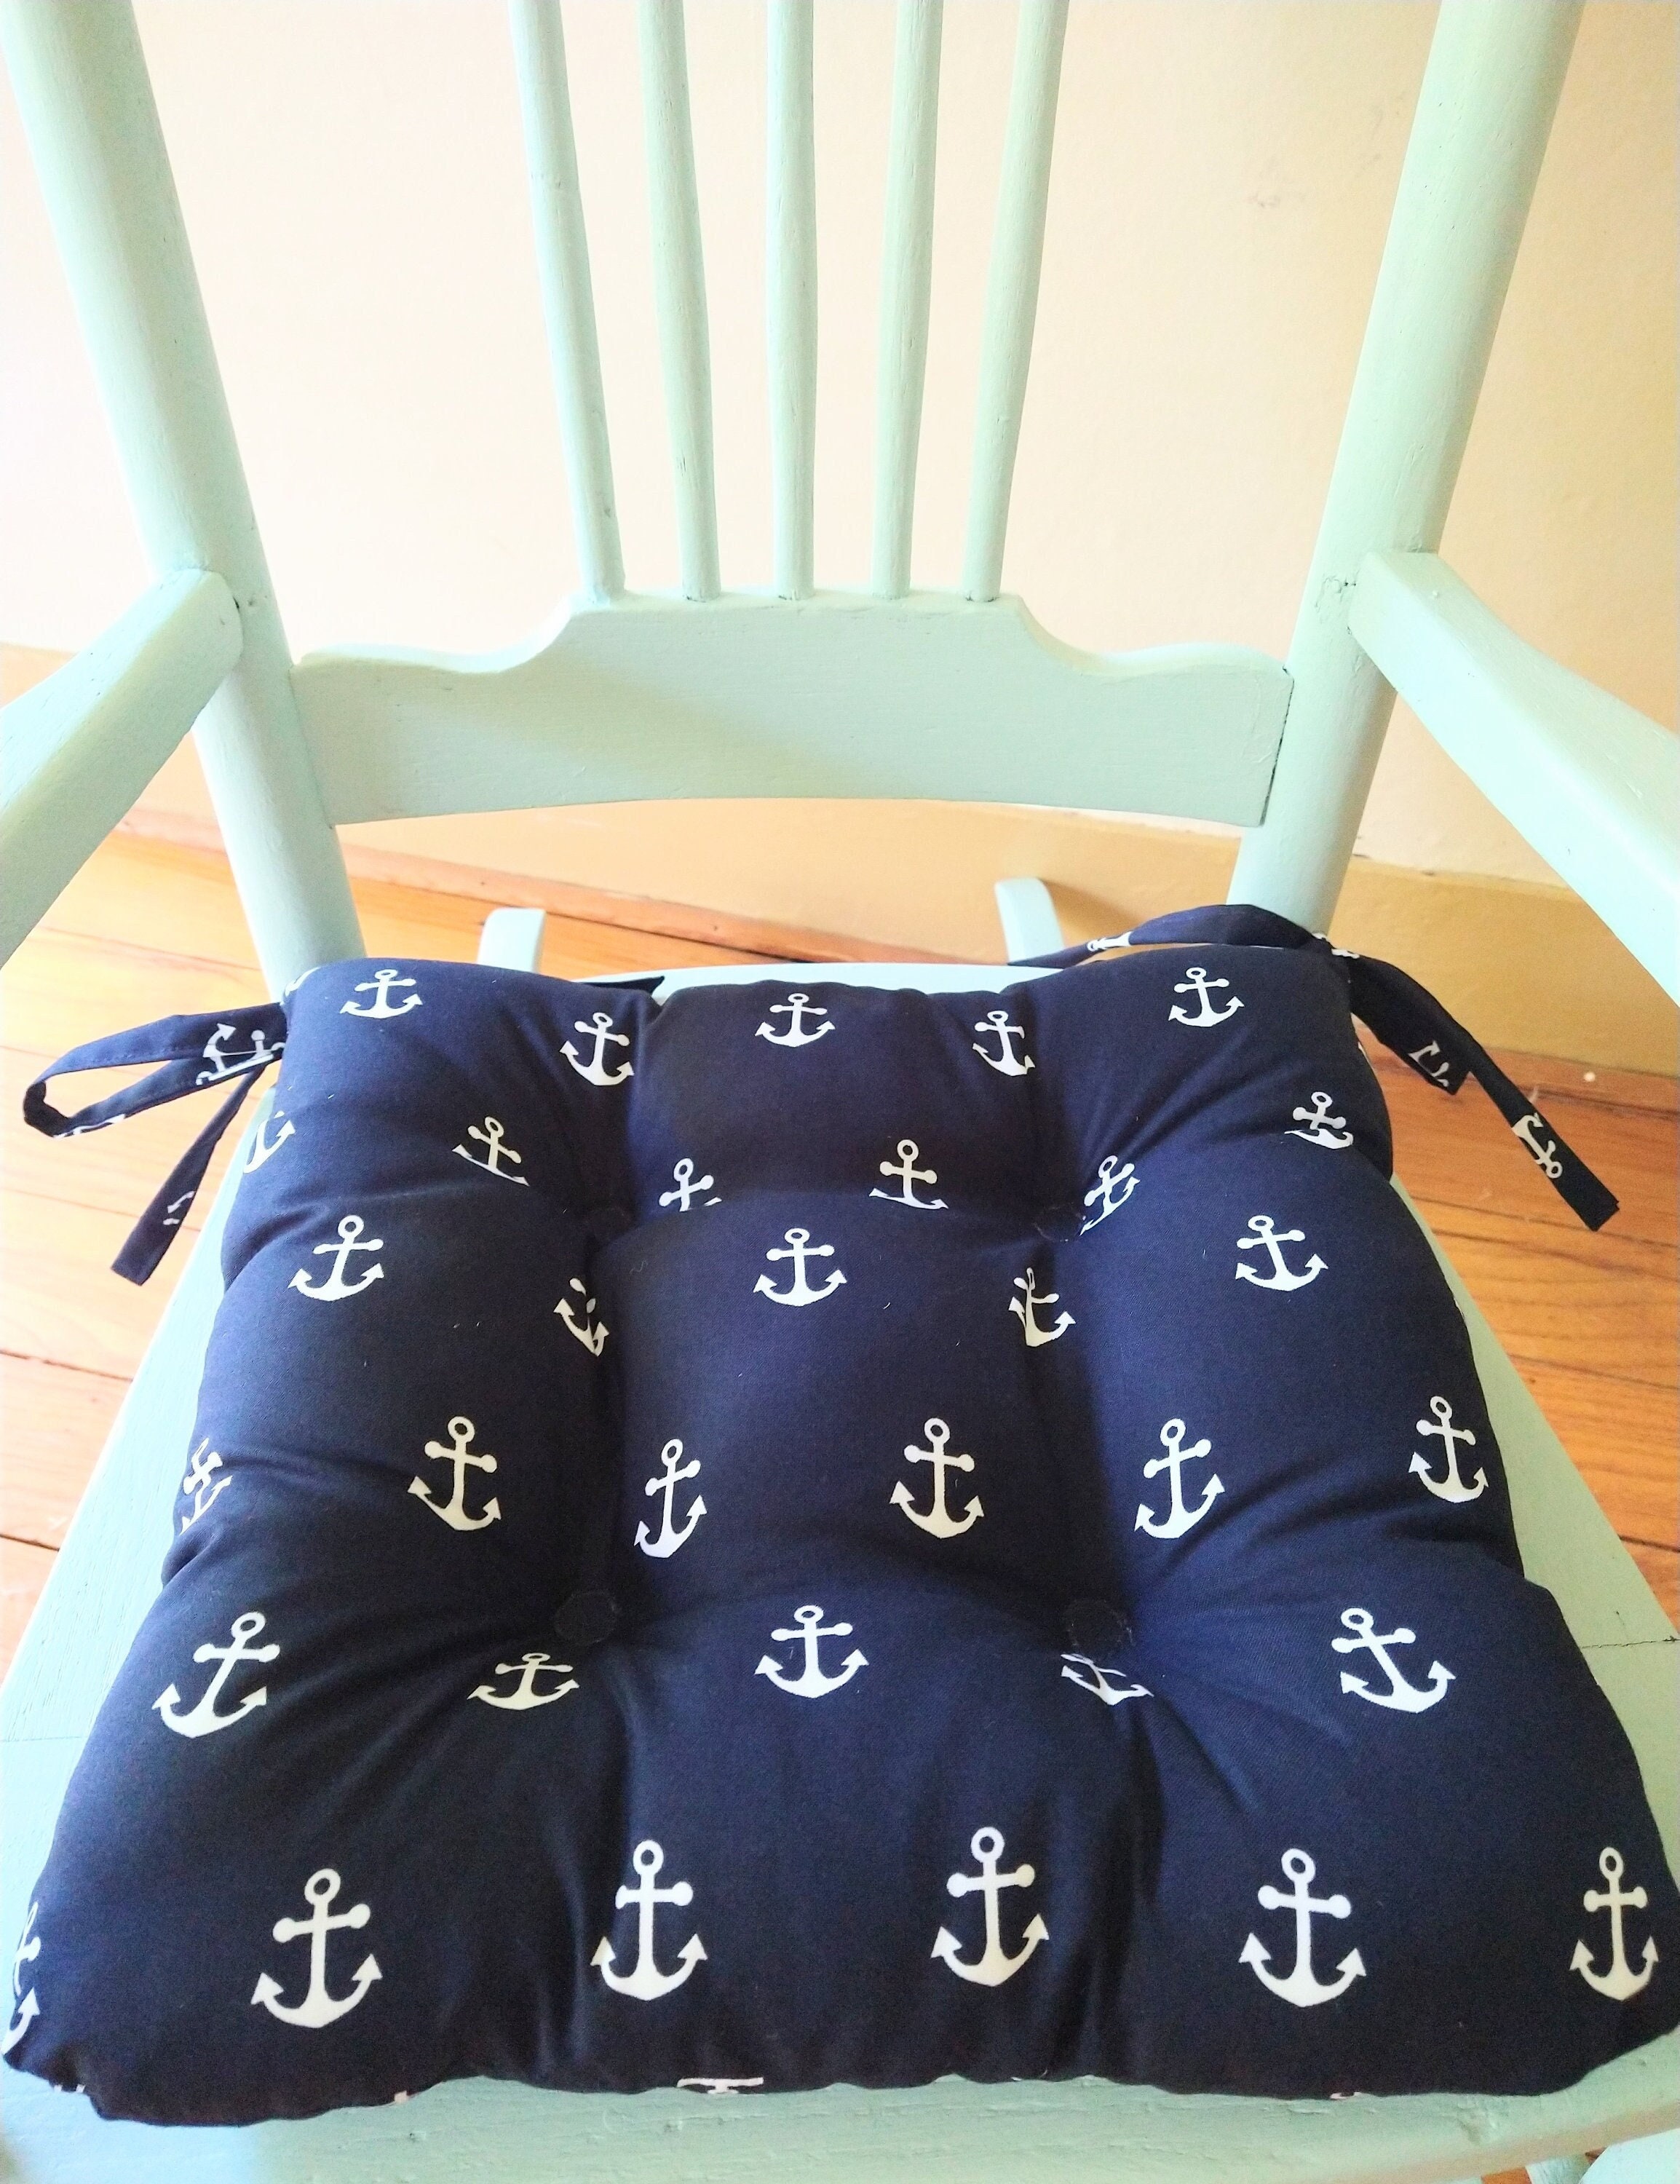 Memory Foam Indoor/Outdoor Chair Pad Cushion The Twillery Co. Fabric: Navy